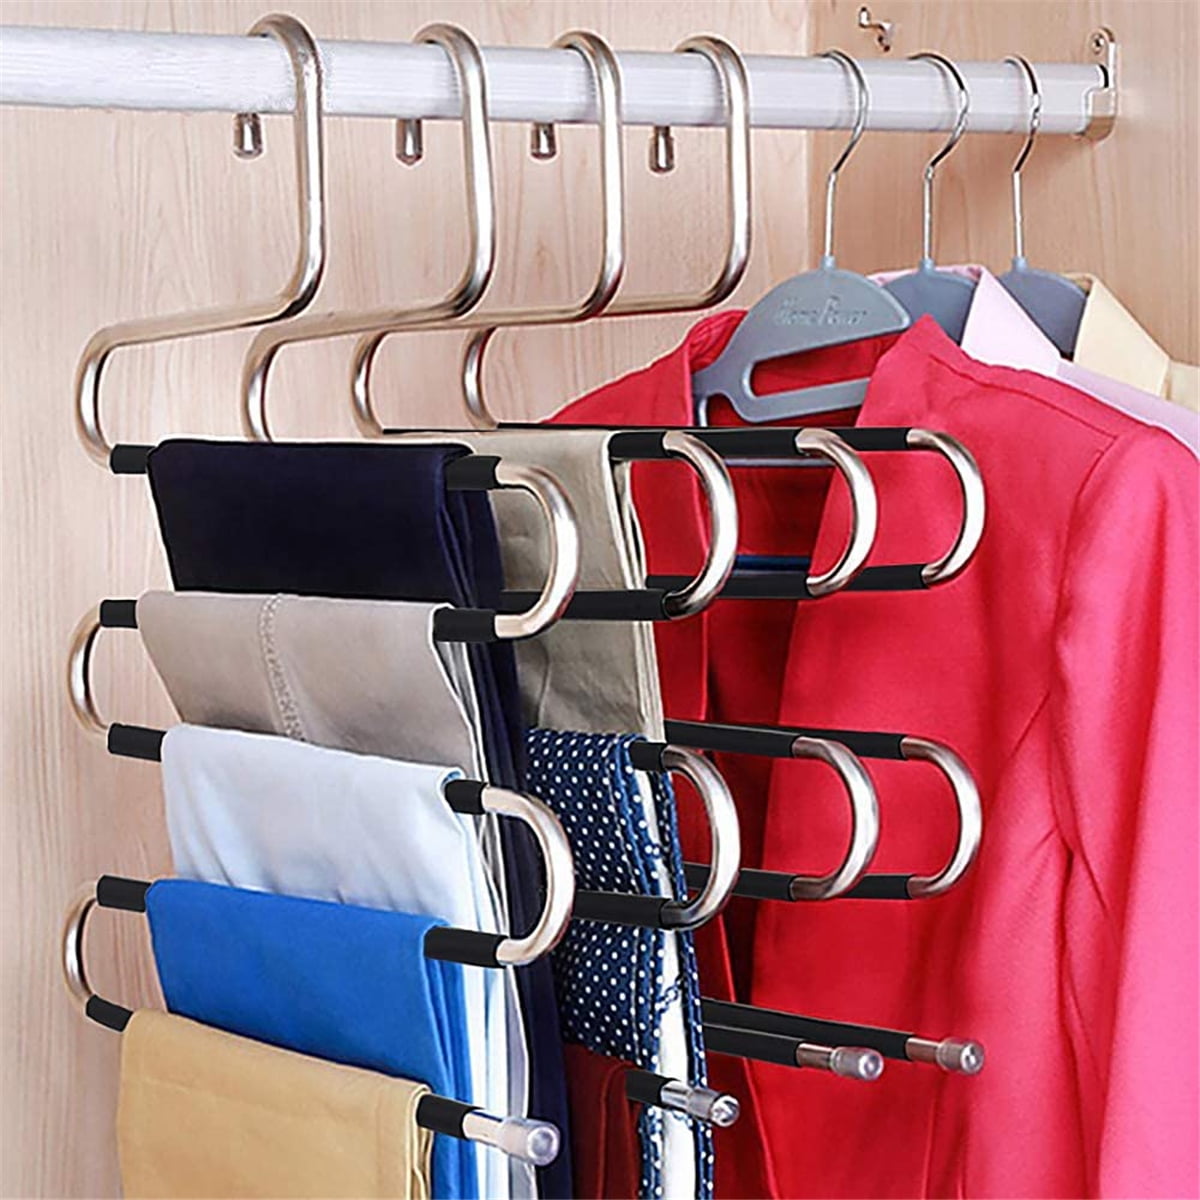 4 Pack Curved Stainless Steel Laundry Drying Rack Clothes Hanger with 10 and 